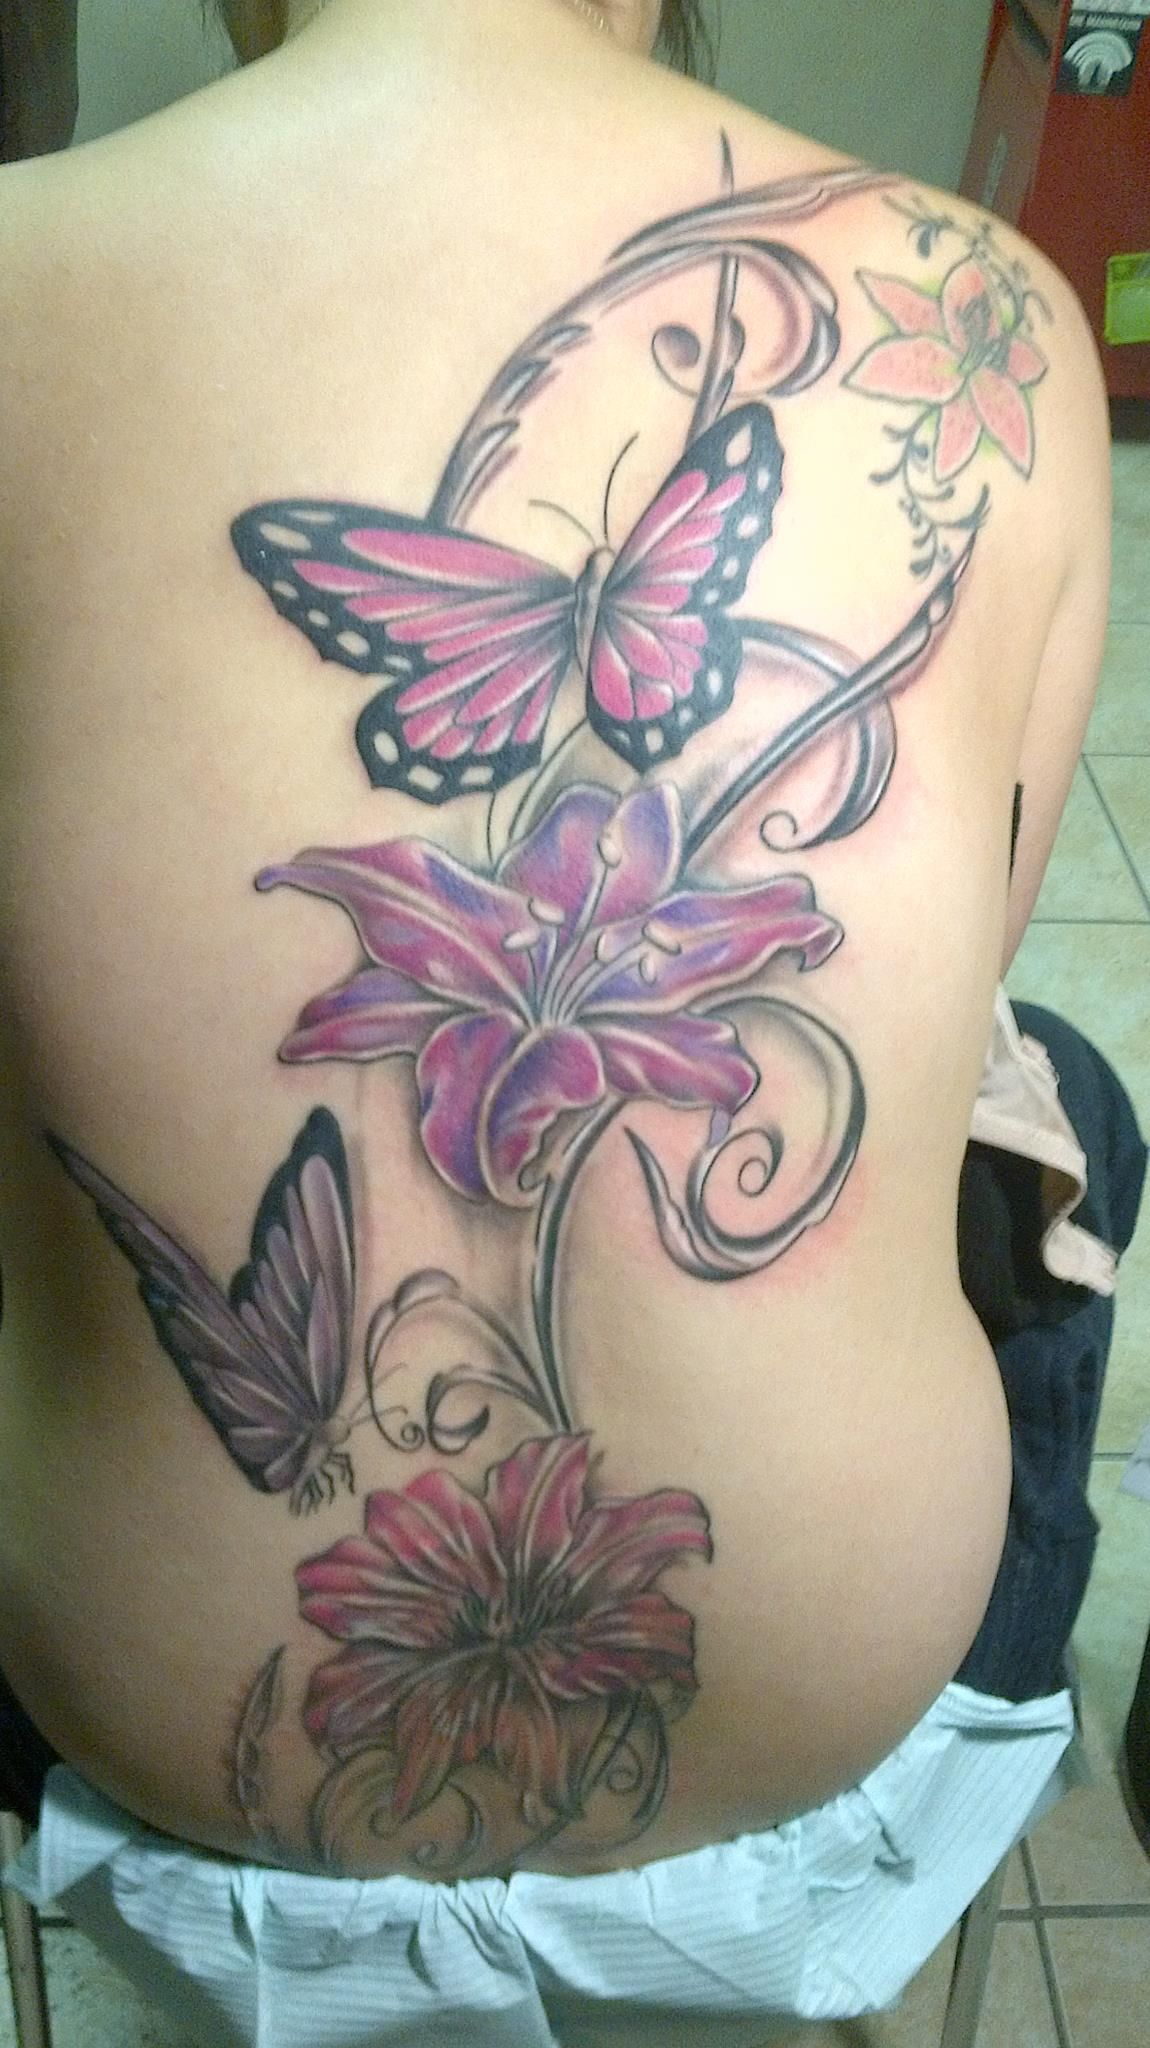 Flower Vine Butterfly Tattoothisbut My Arm Tattoo Ideas with regard to dimensions 1150 X 2048